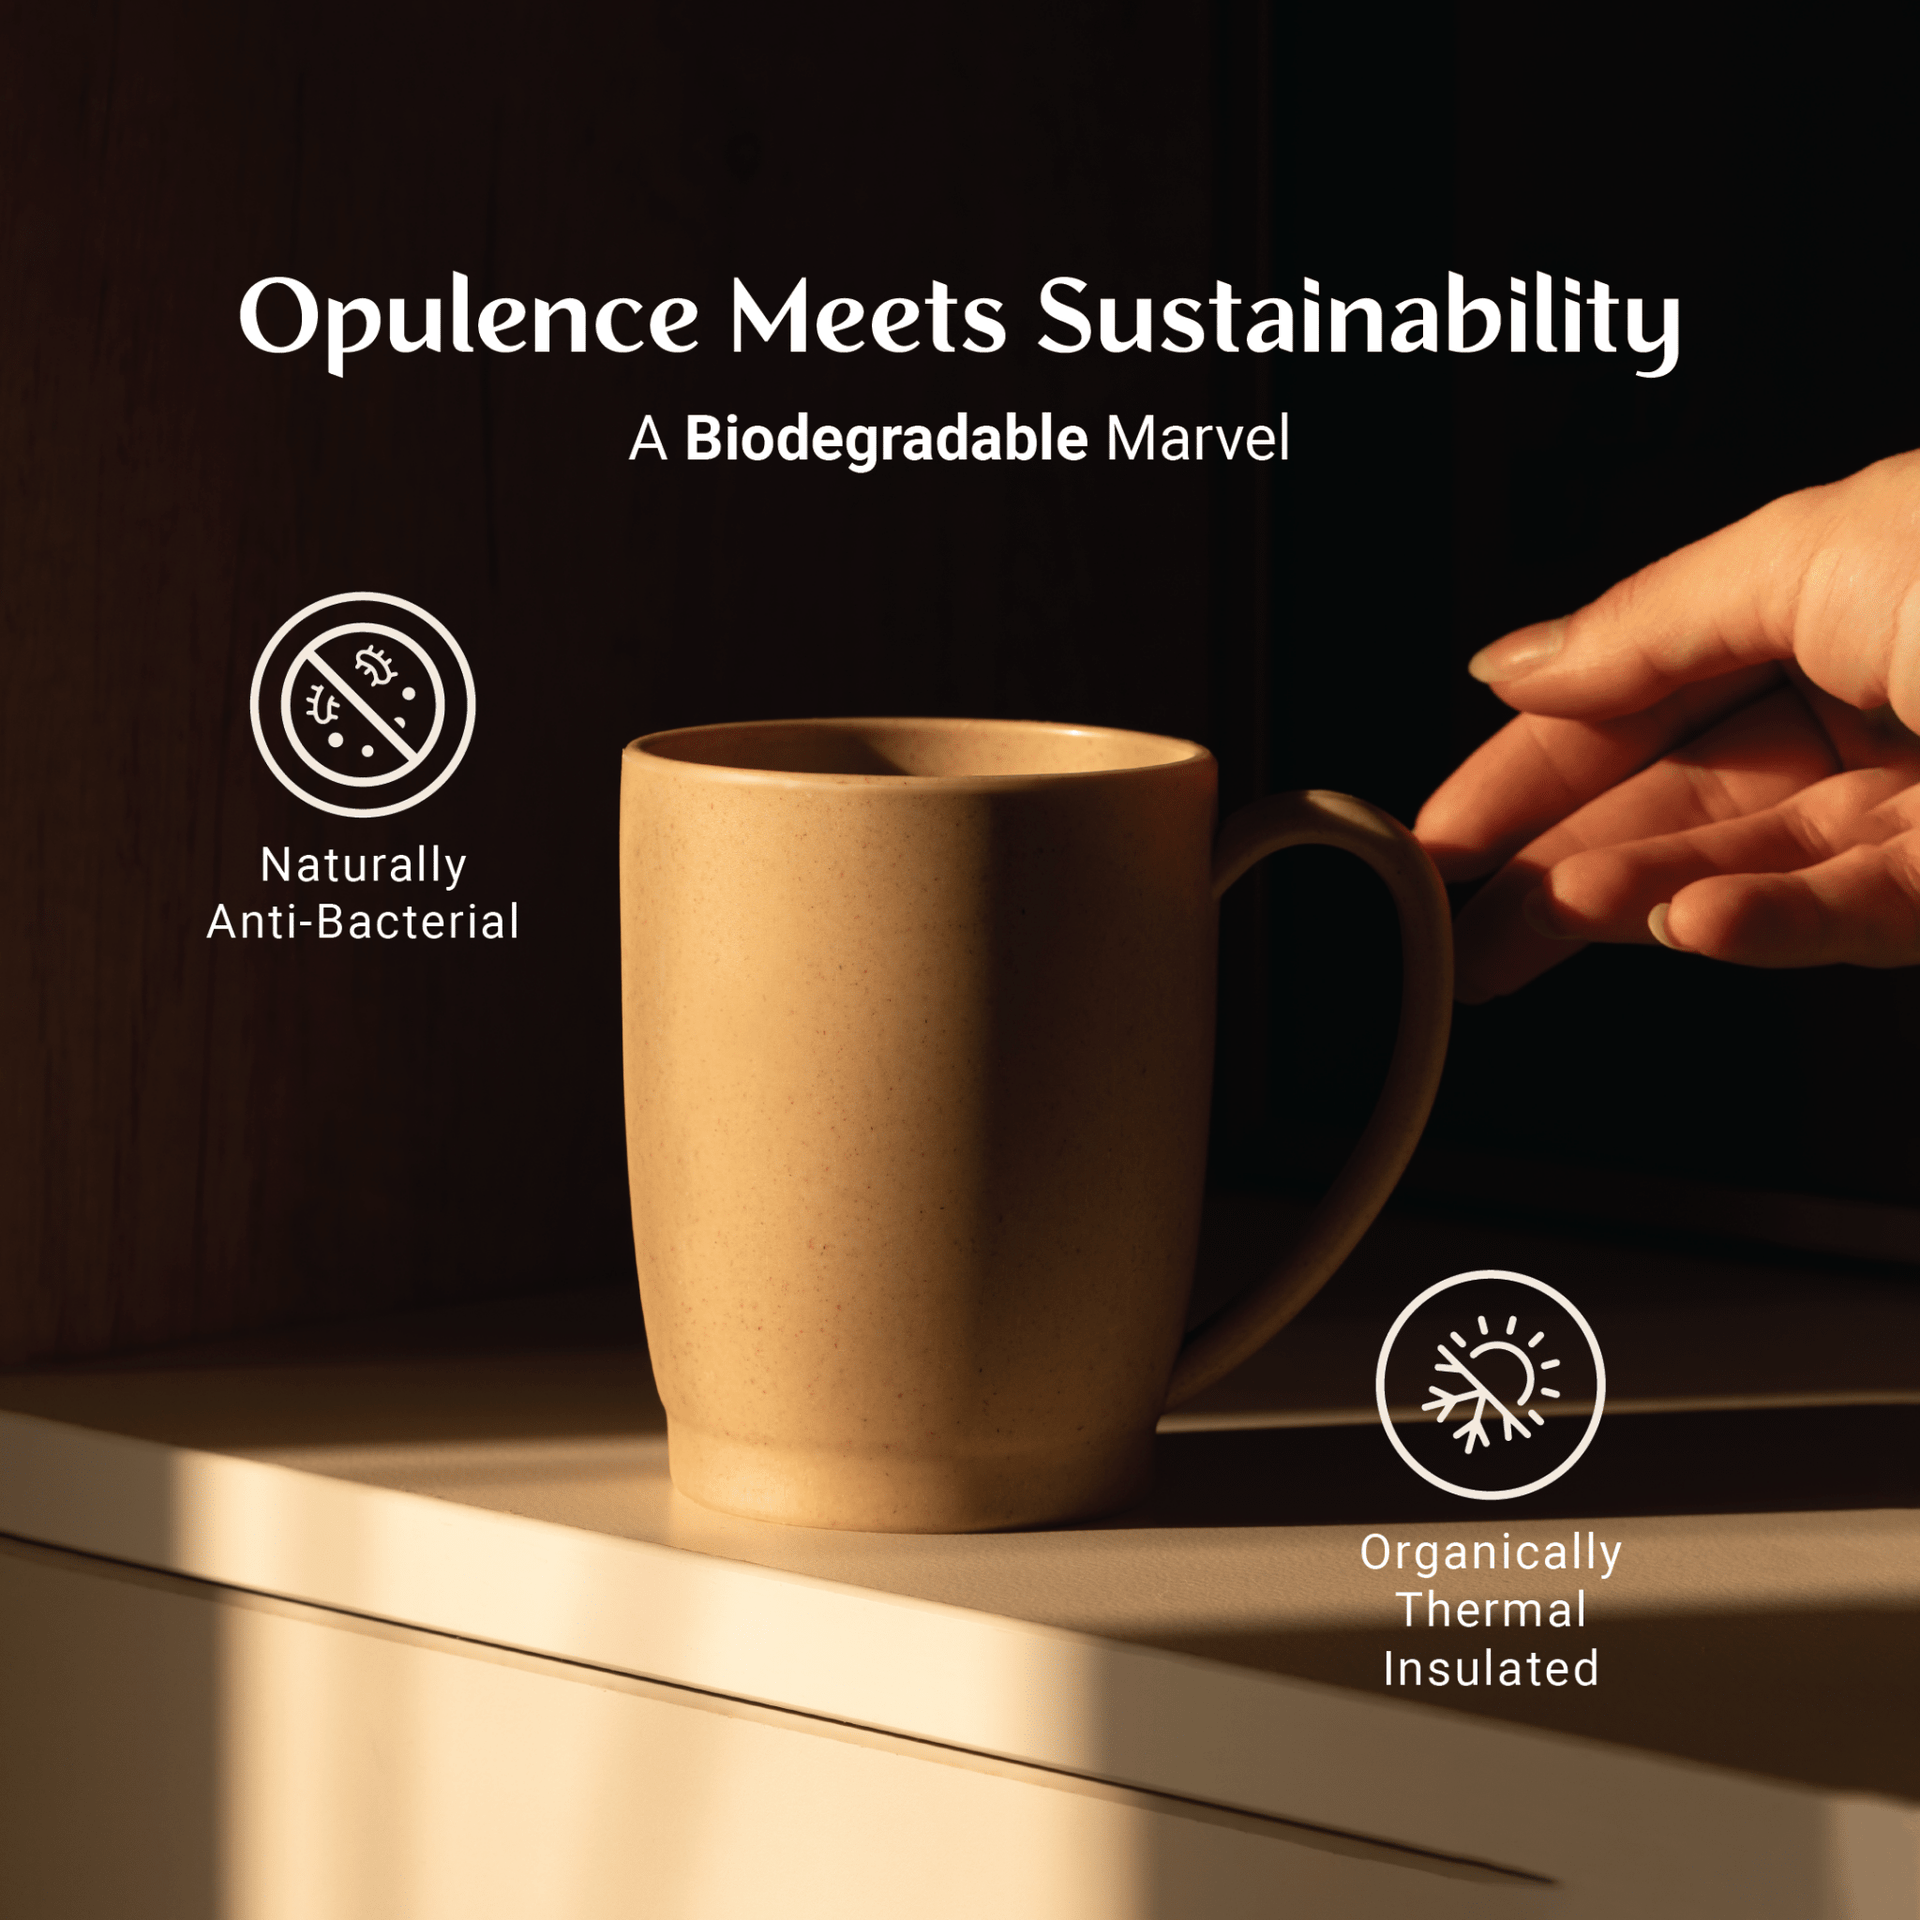 Opulence Meets Sustainability